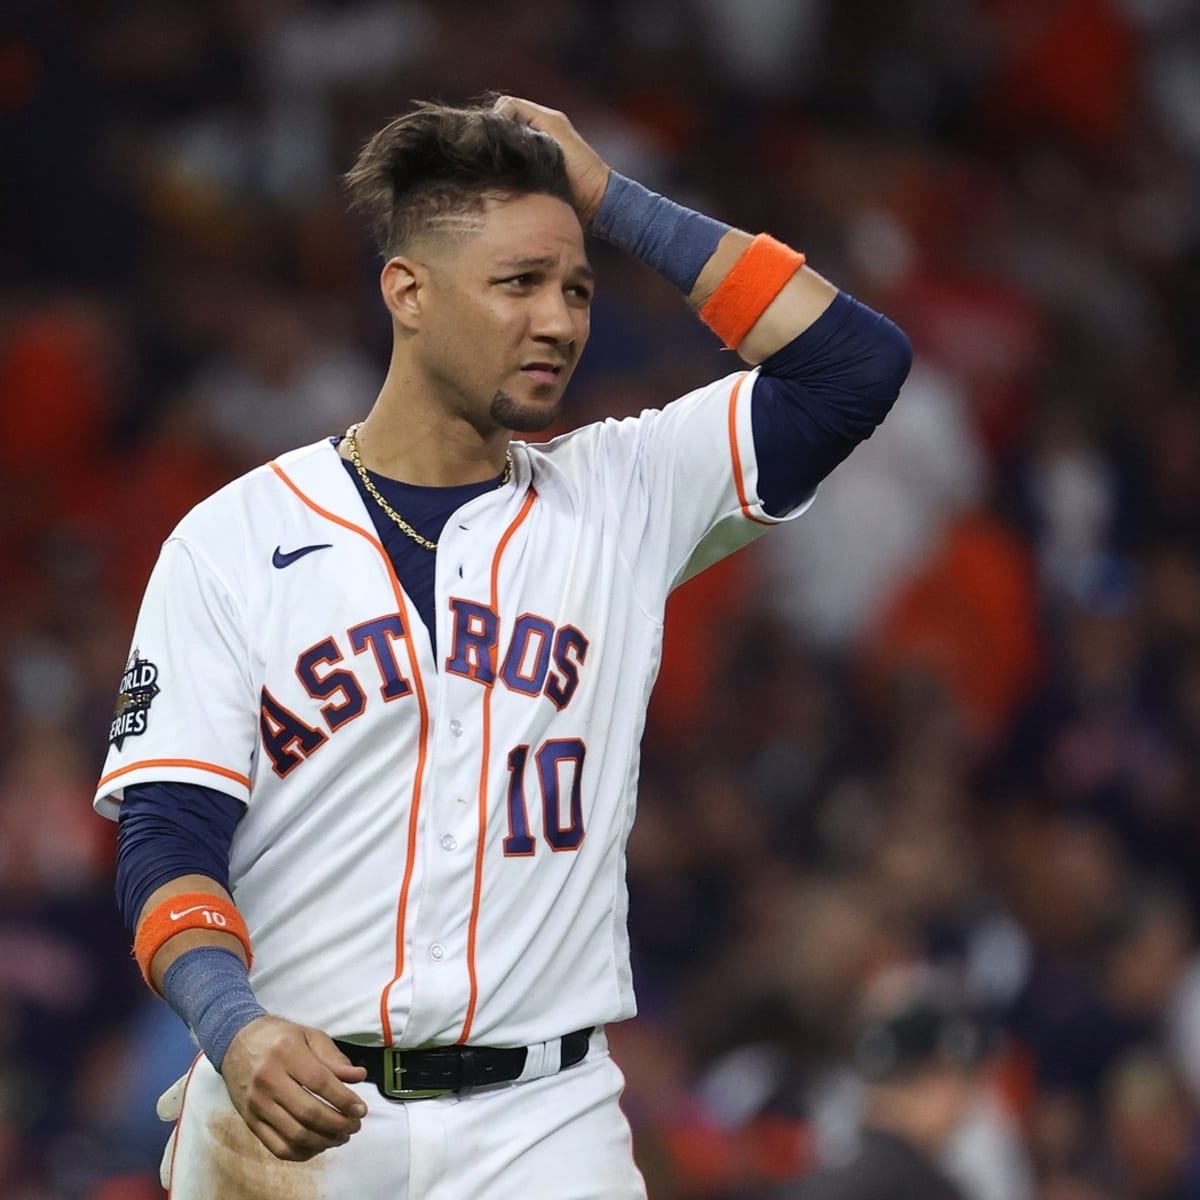 Astros 1B Yuli Gurriel (knee) out for rest of World Series - ESPN